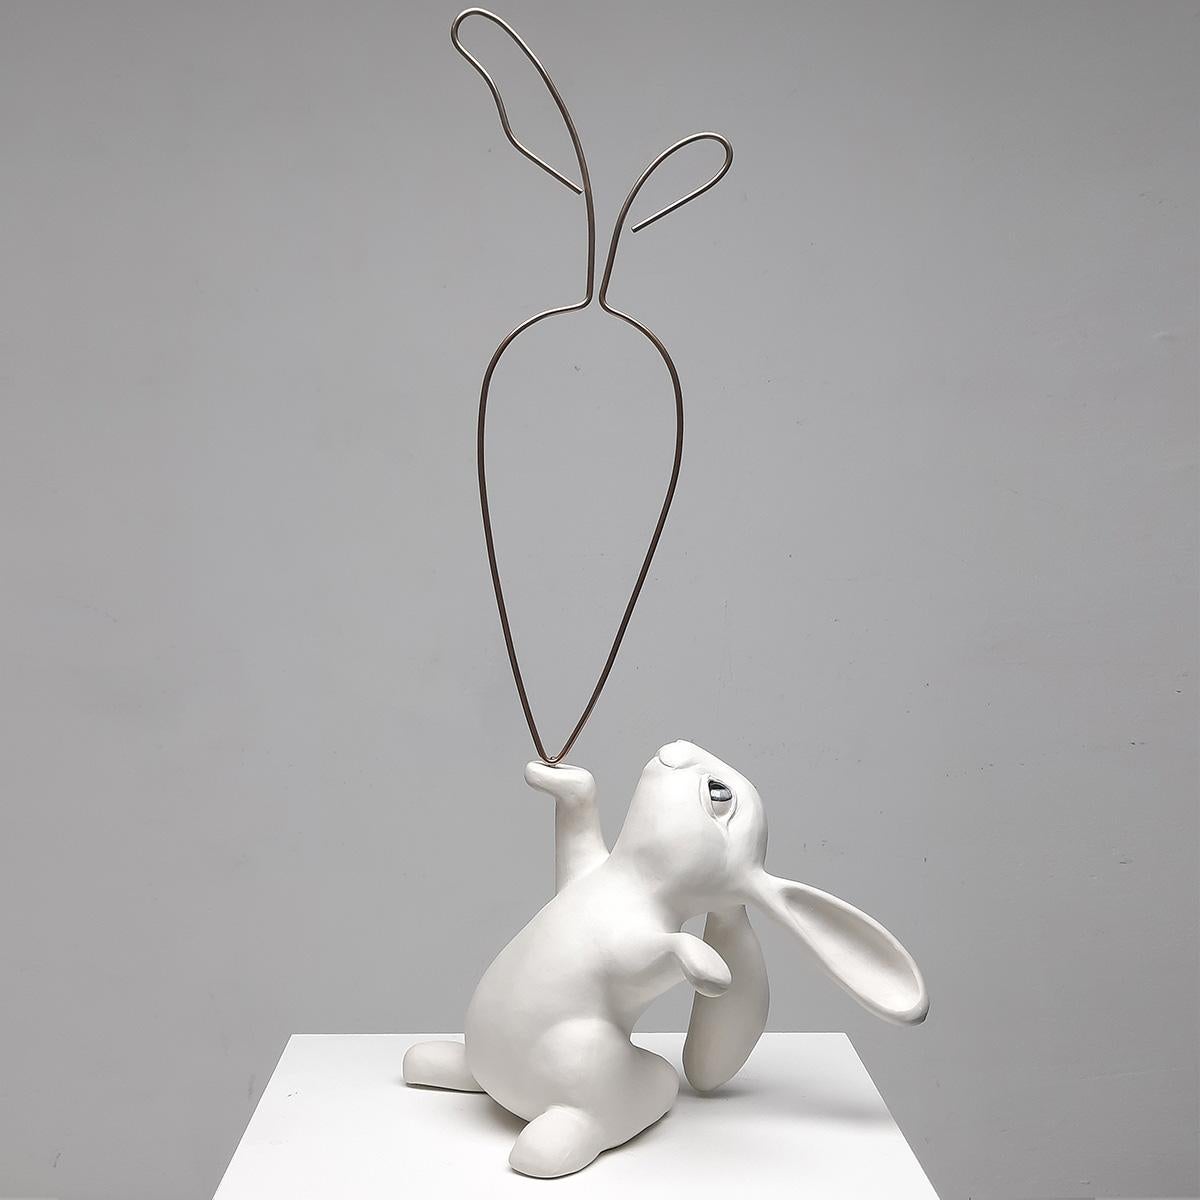 "24 Carrot Gold (White)" by Henk Jan Sanderman is a captivating ceramic tabletop sculpture that radiates elegance and charm. This original artwork features a beautifully crafted bunny rabbit, painted in pristine white, delicately holding a bronze